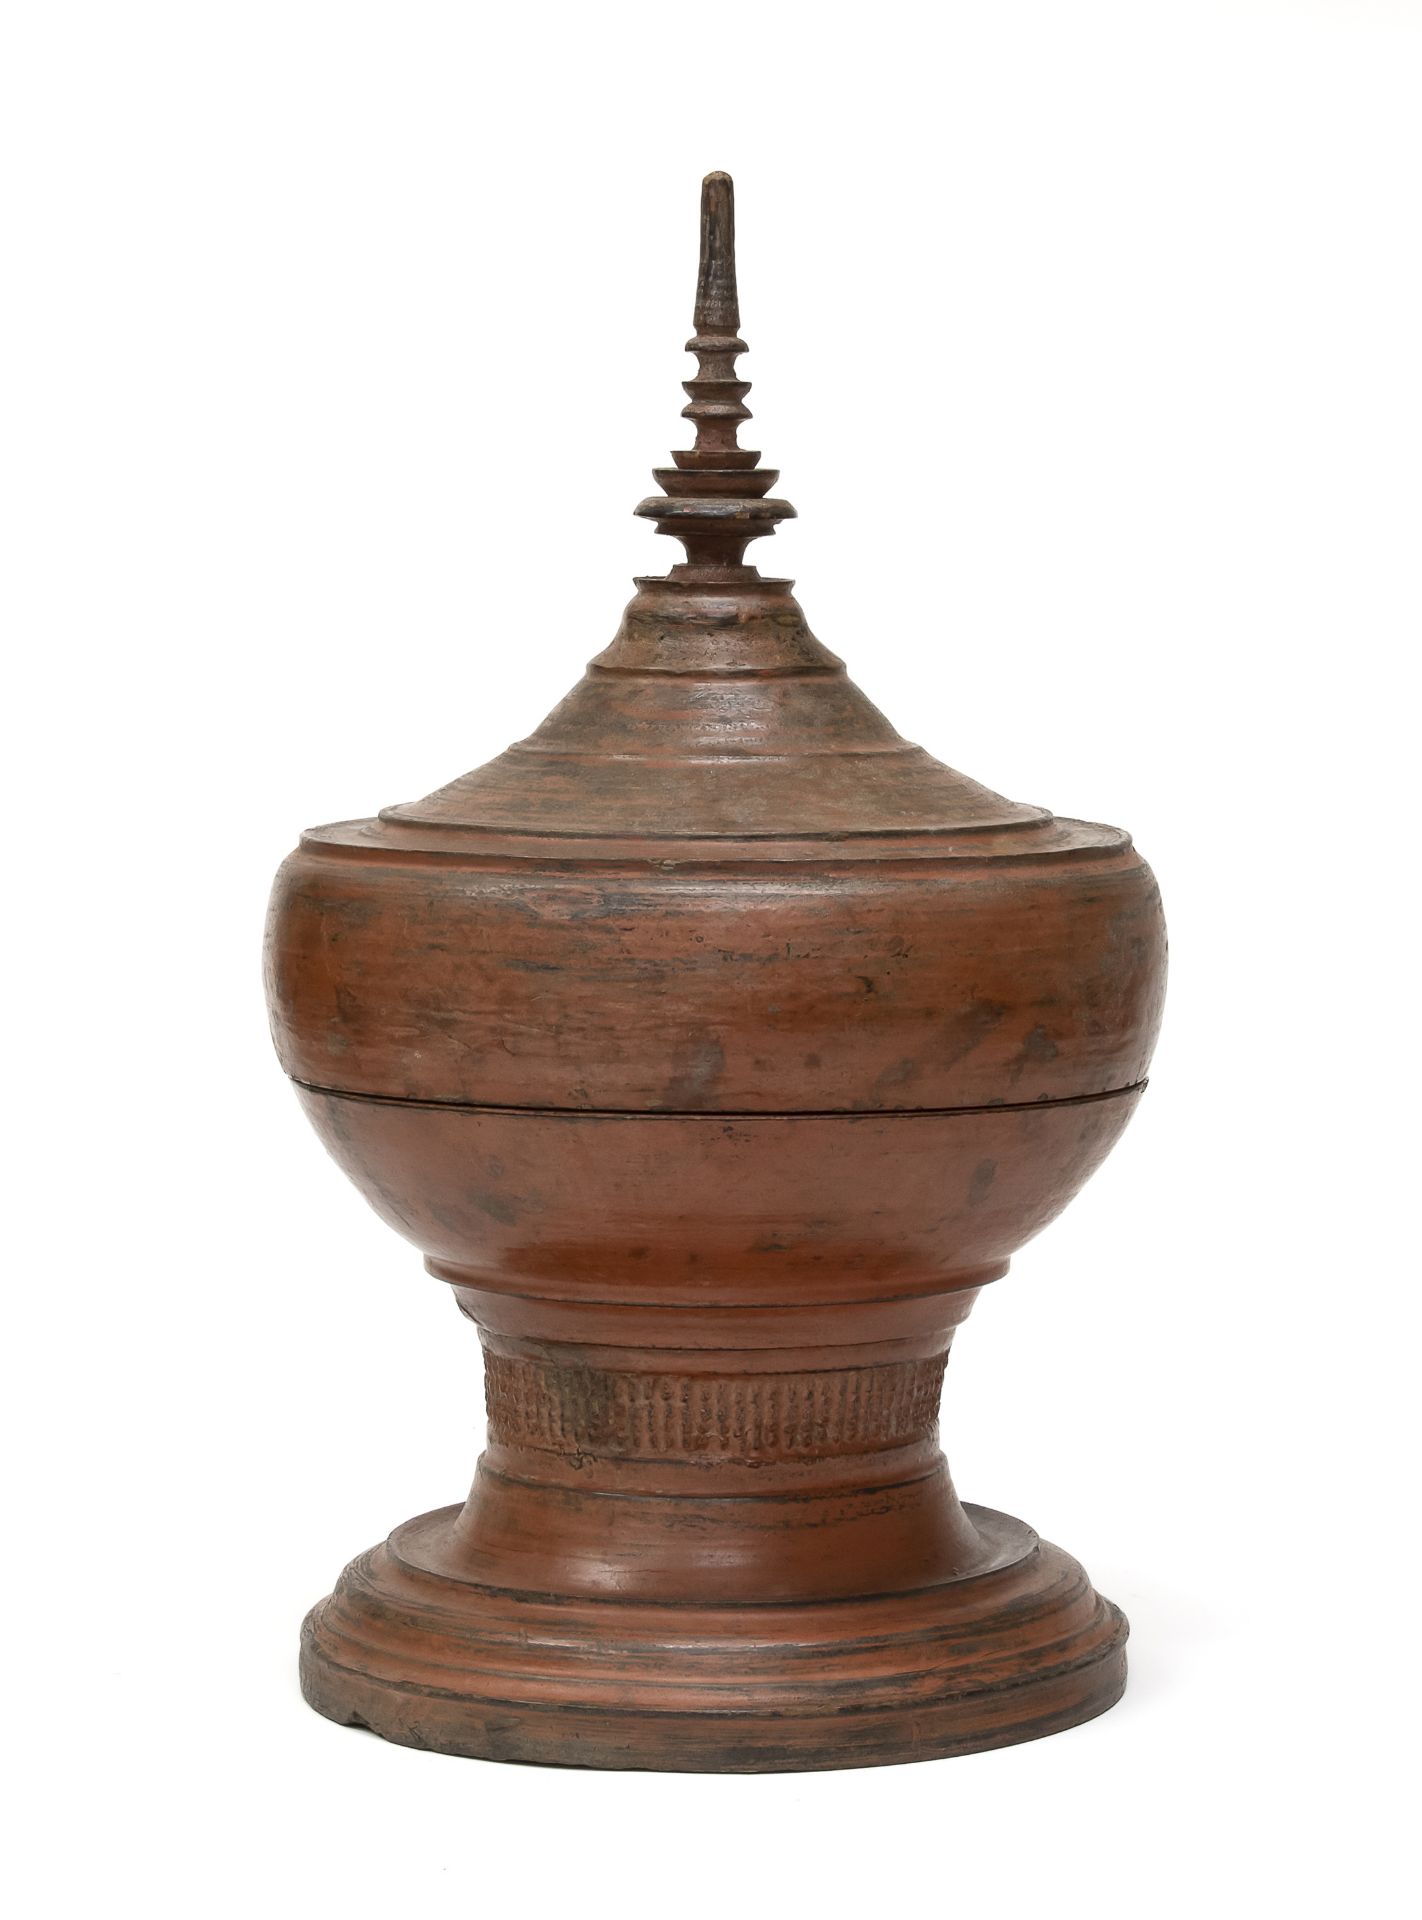 A RED LAQUER WOOD STUPA. PROBABLY BURMA 20TH CENTURY.